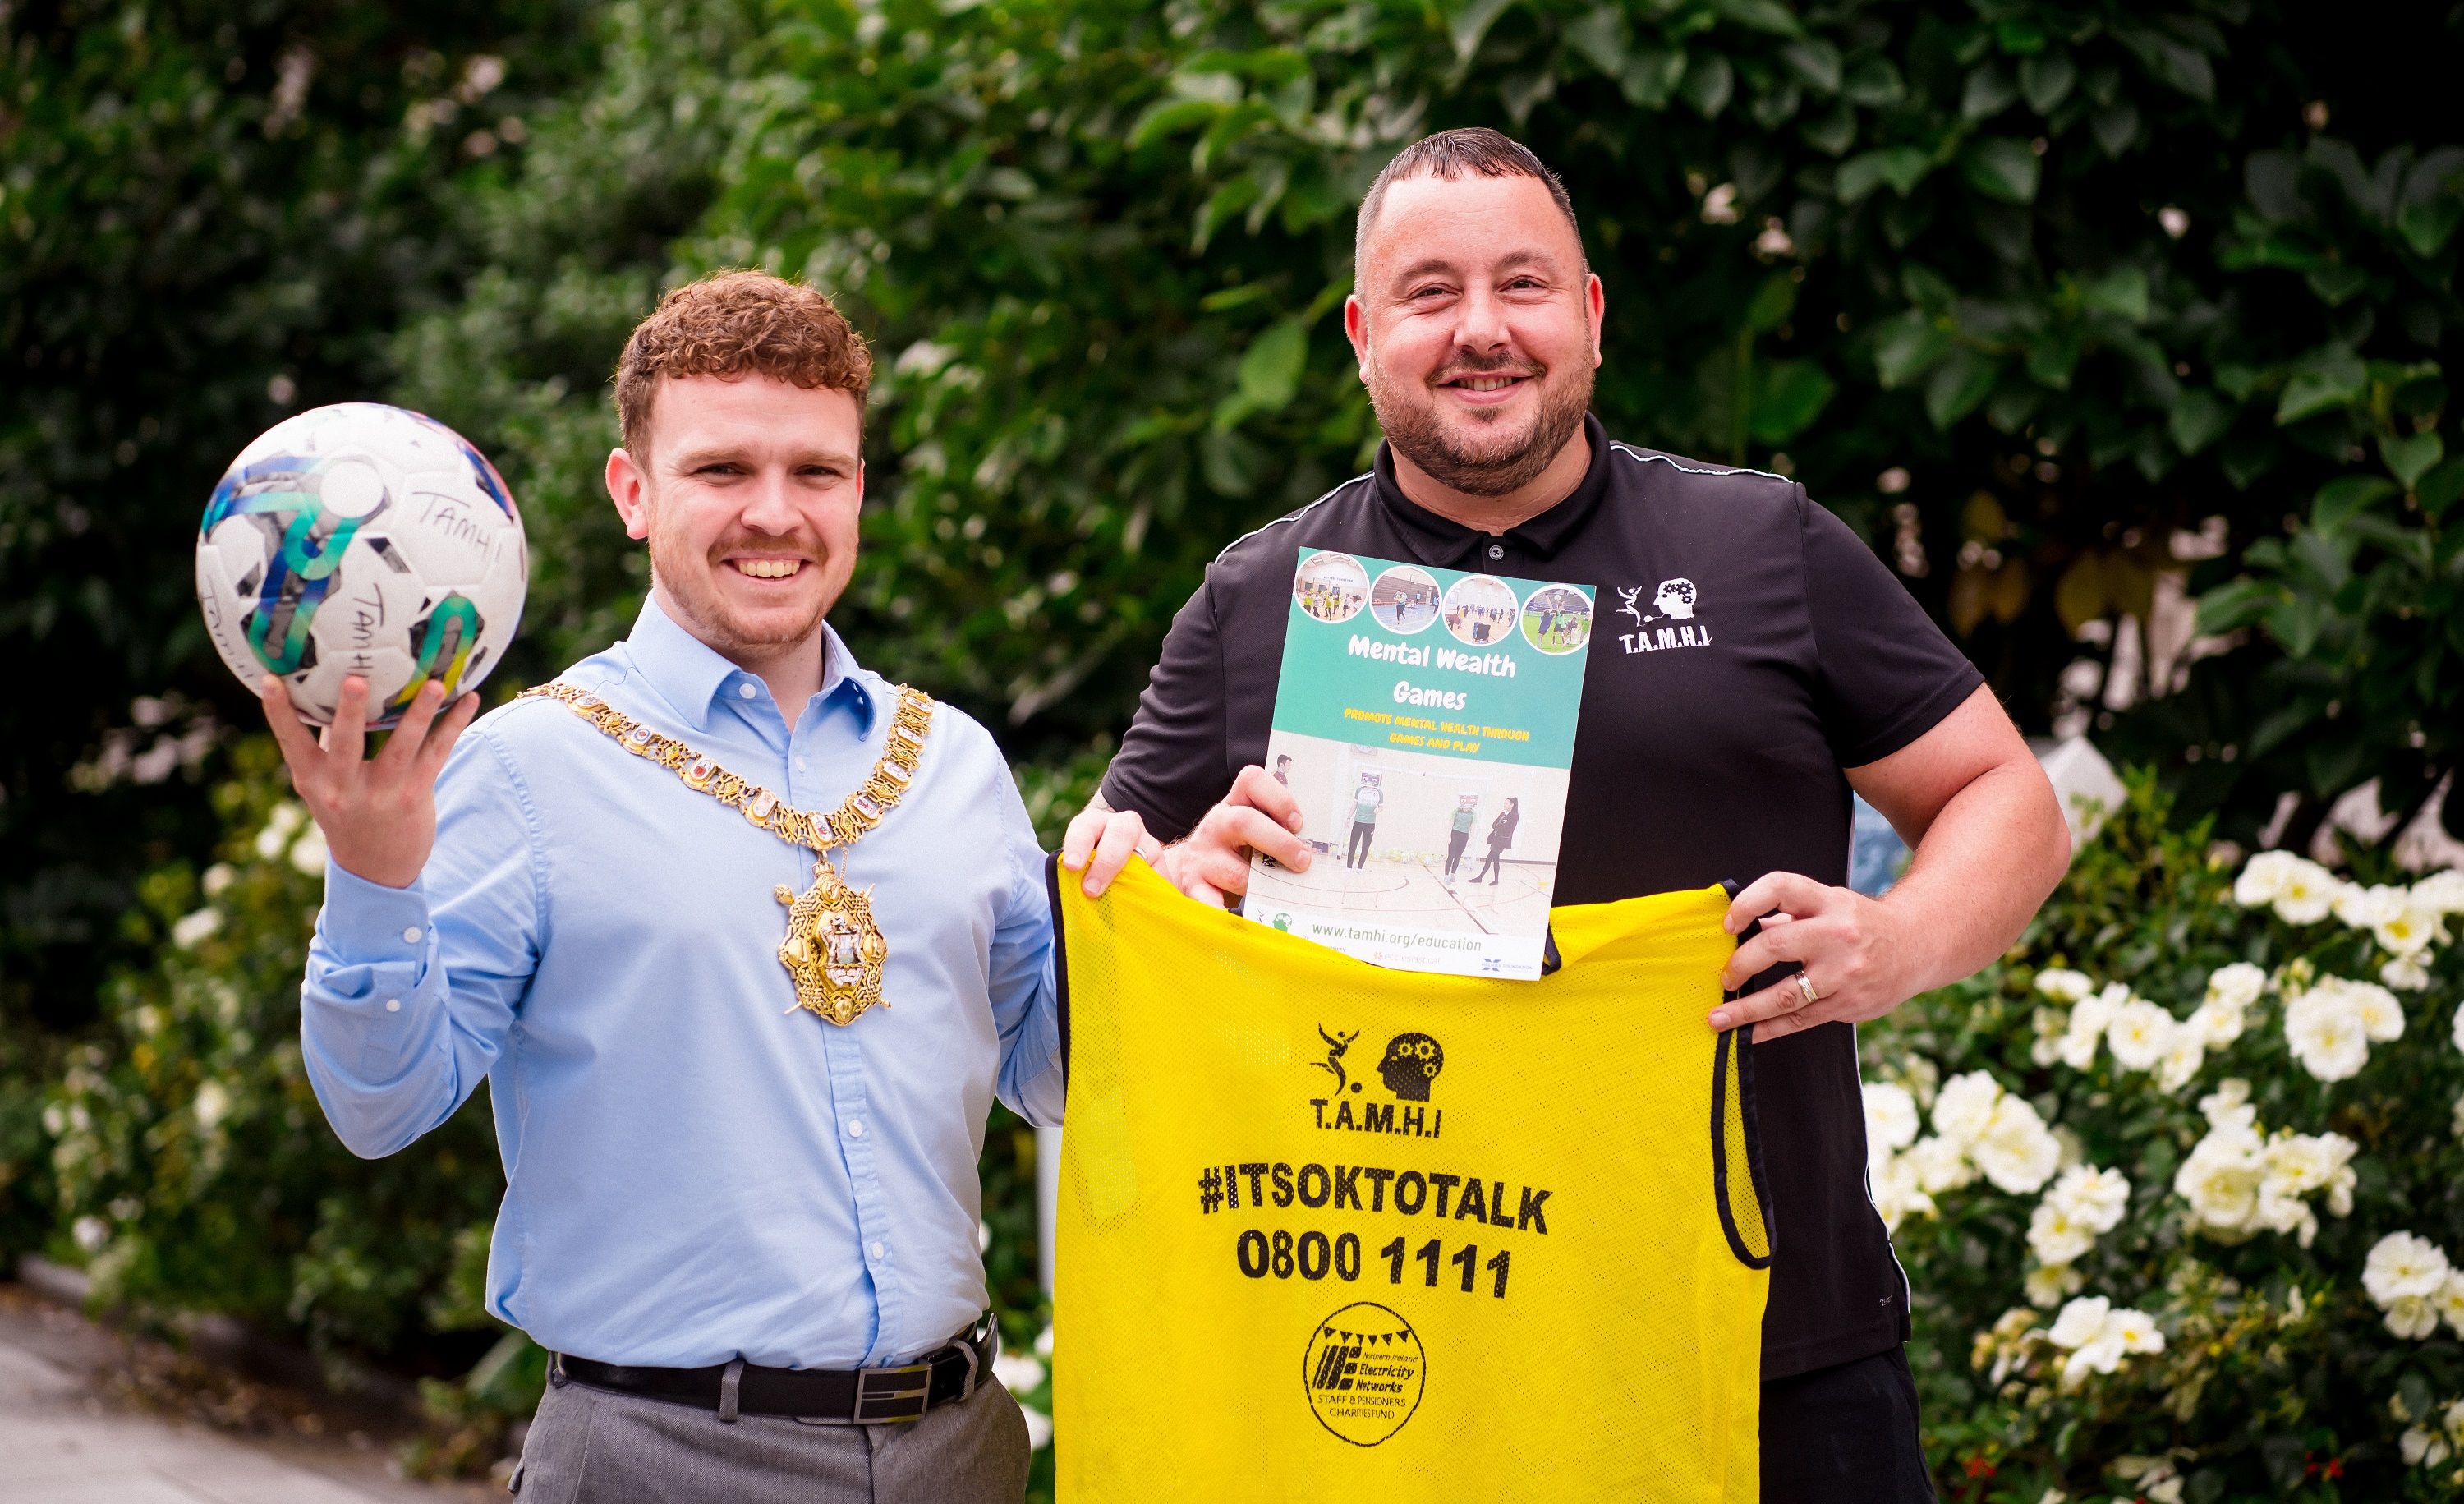 SUPPORT: Lord Mayor of Belfast Councillor Ryan Murphy with Mickey Meehan from TAMHI (Tackling Awareness of Mental Health Issues).